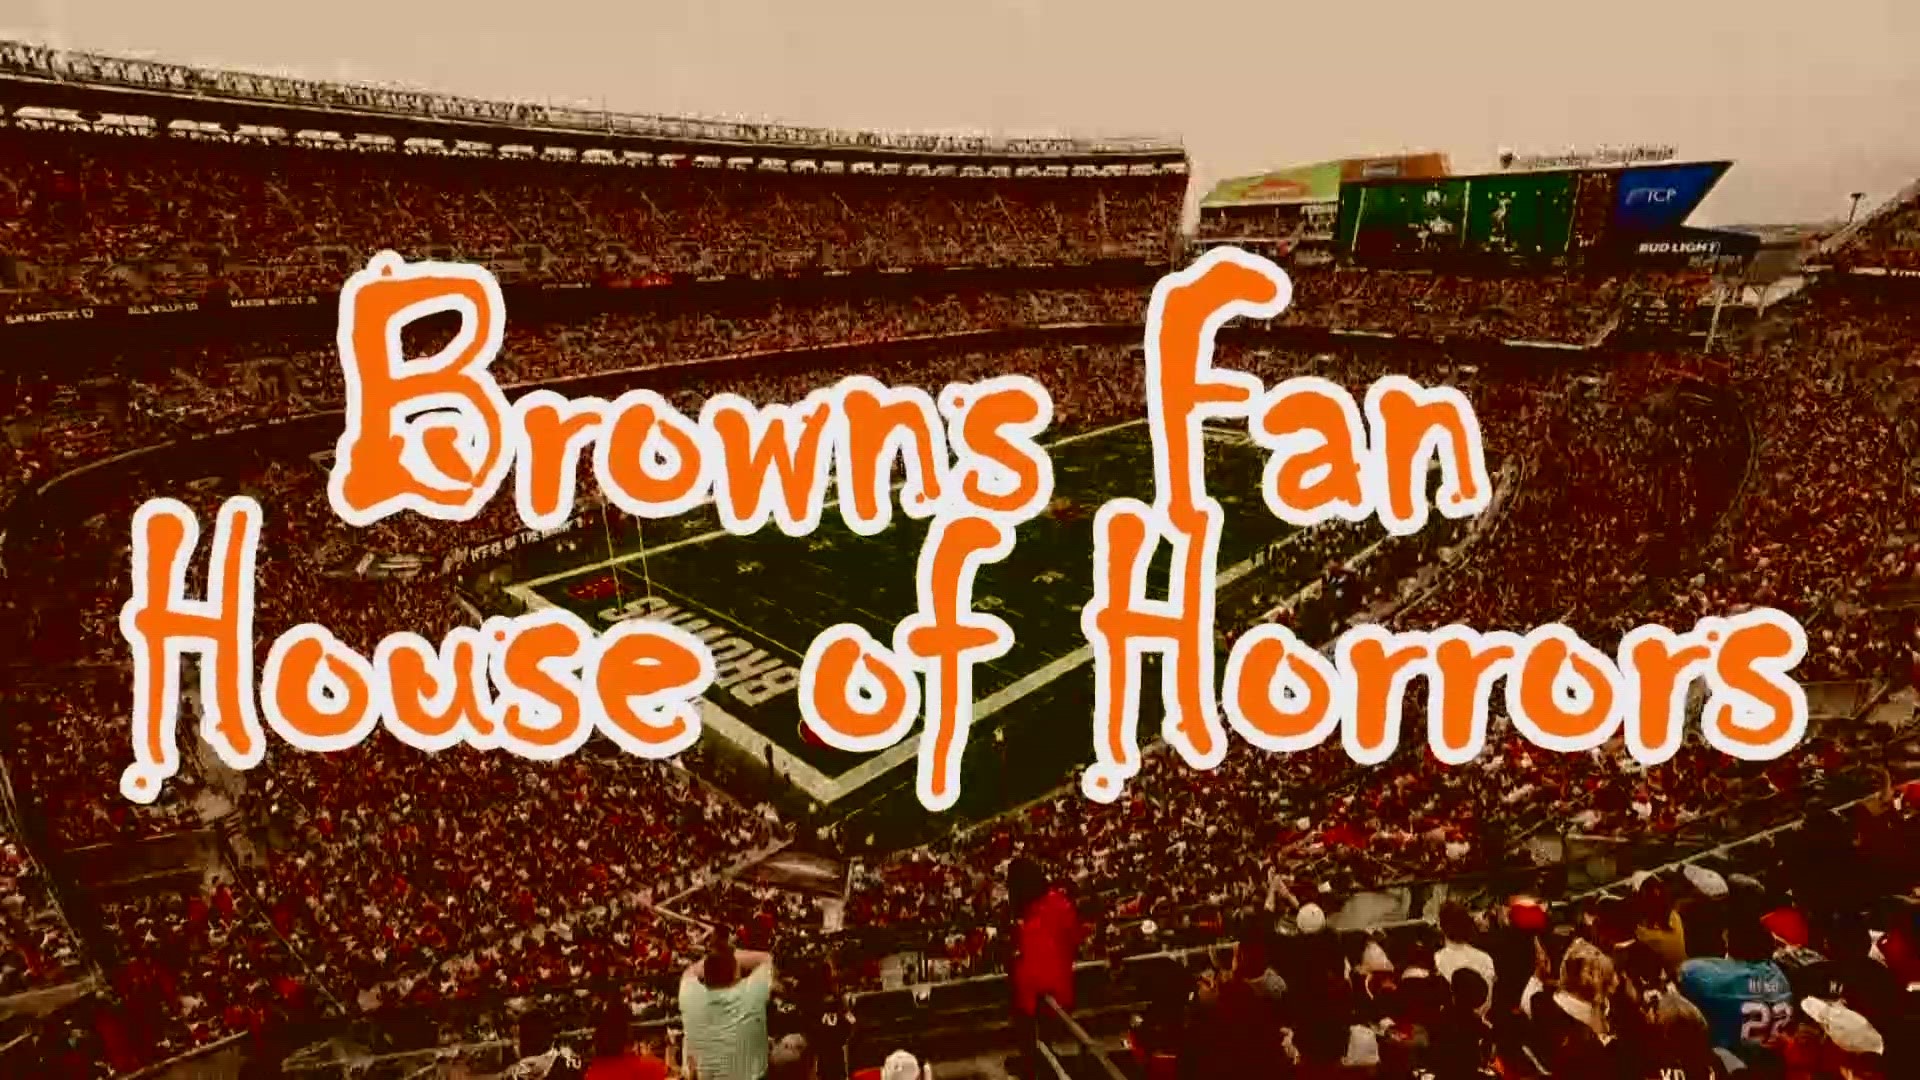 All things considered, the Browns are playing scarily well, despite the many bedeviling circumstances that have befallen them. But these horrors are real!